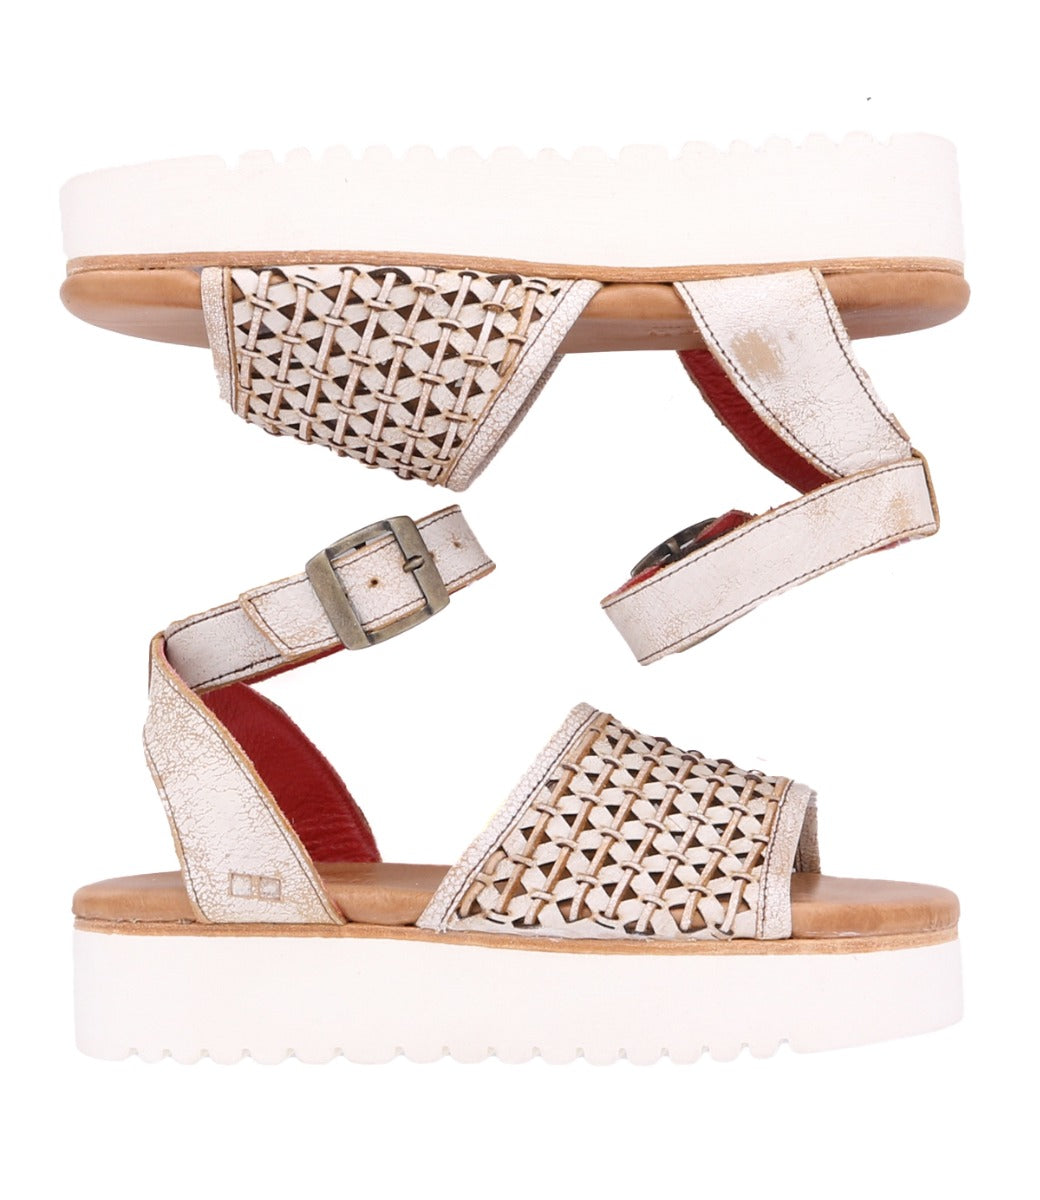 A pair of Brisa white sandals with braided straps by Bed Stu.